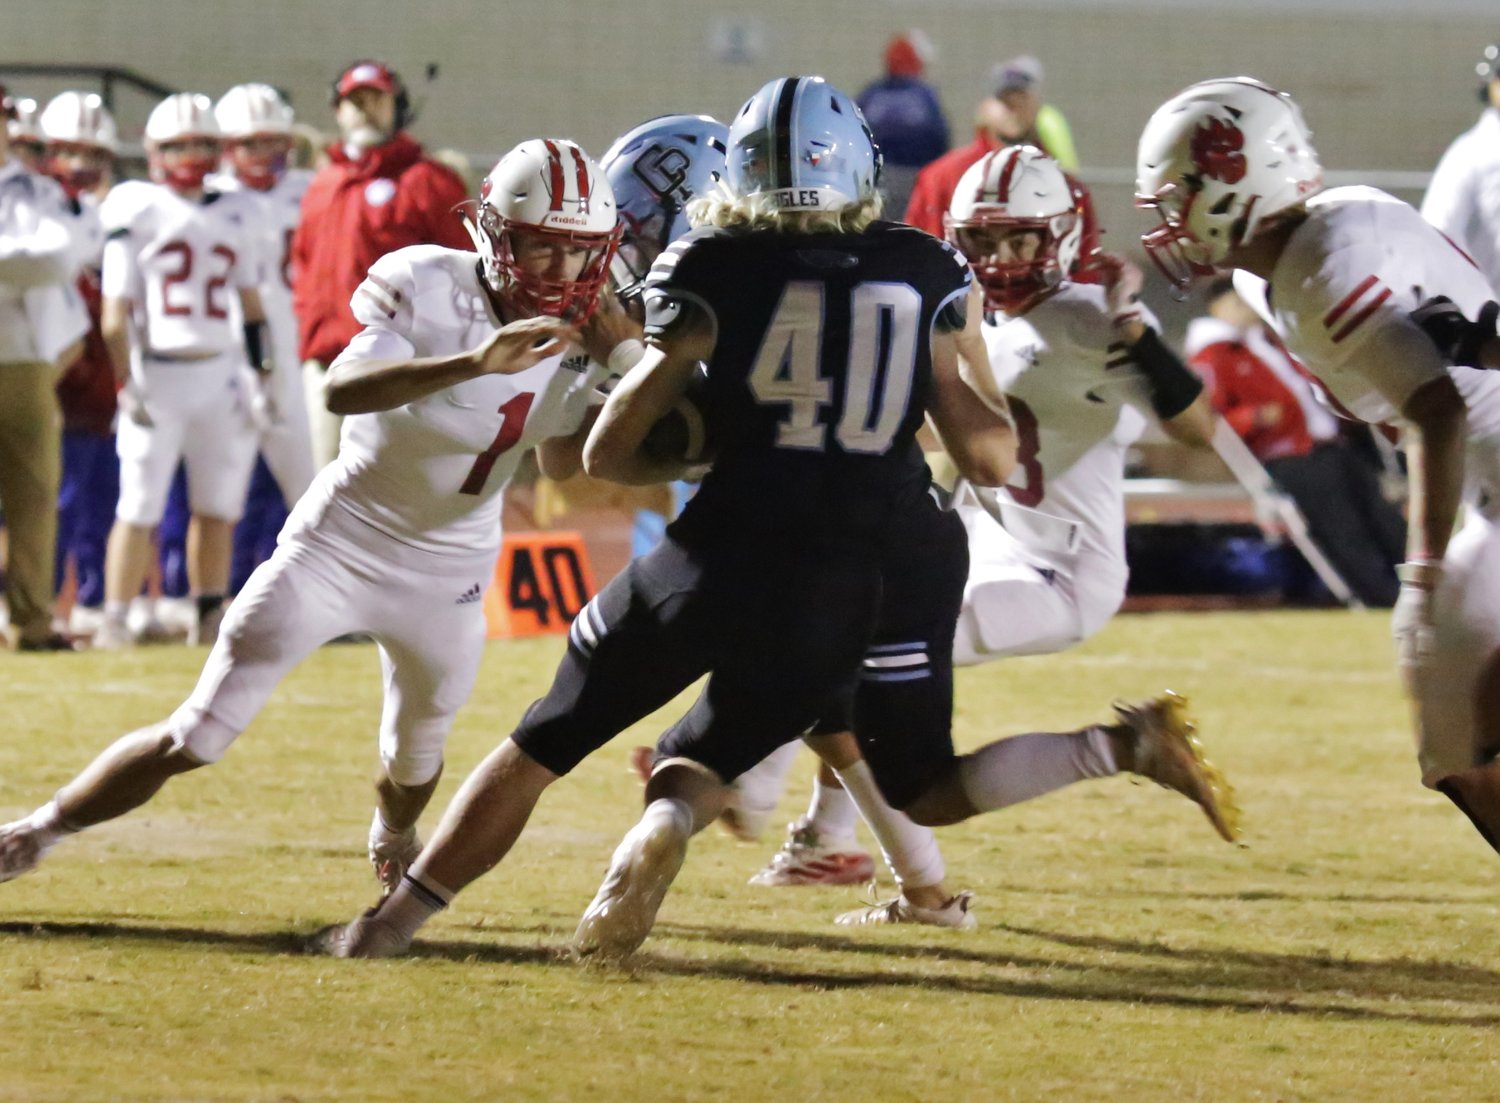 Panthers (from the left) Braylon Moffett, Nick Hallman and Jerry Skinner close in on an Eagle ball carrier.